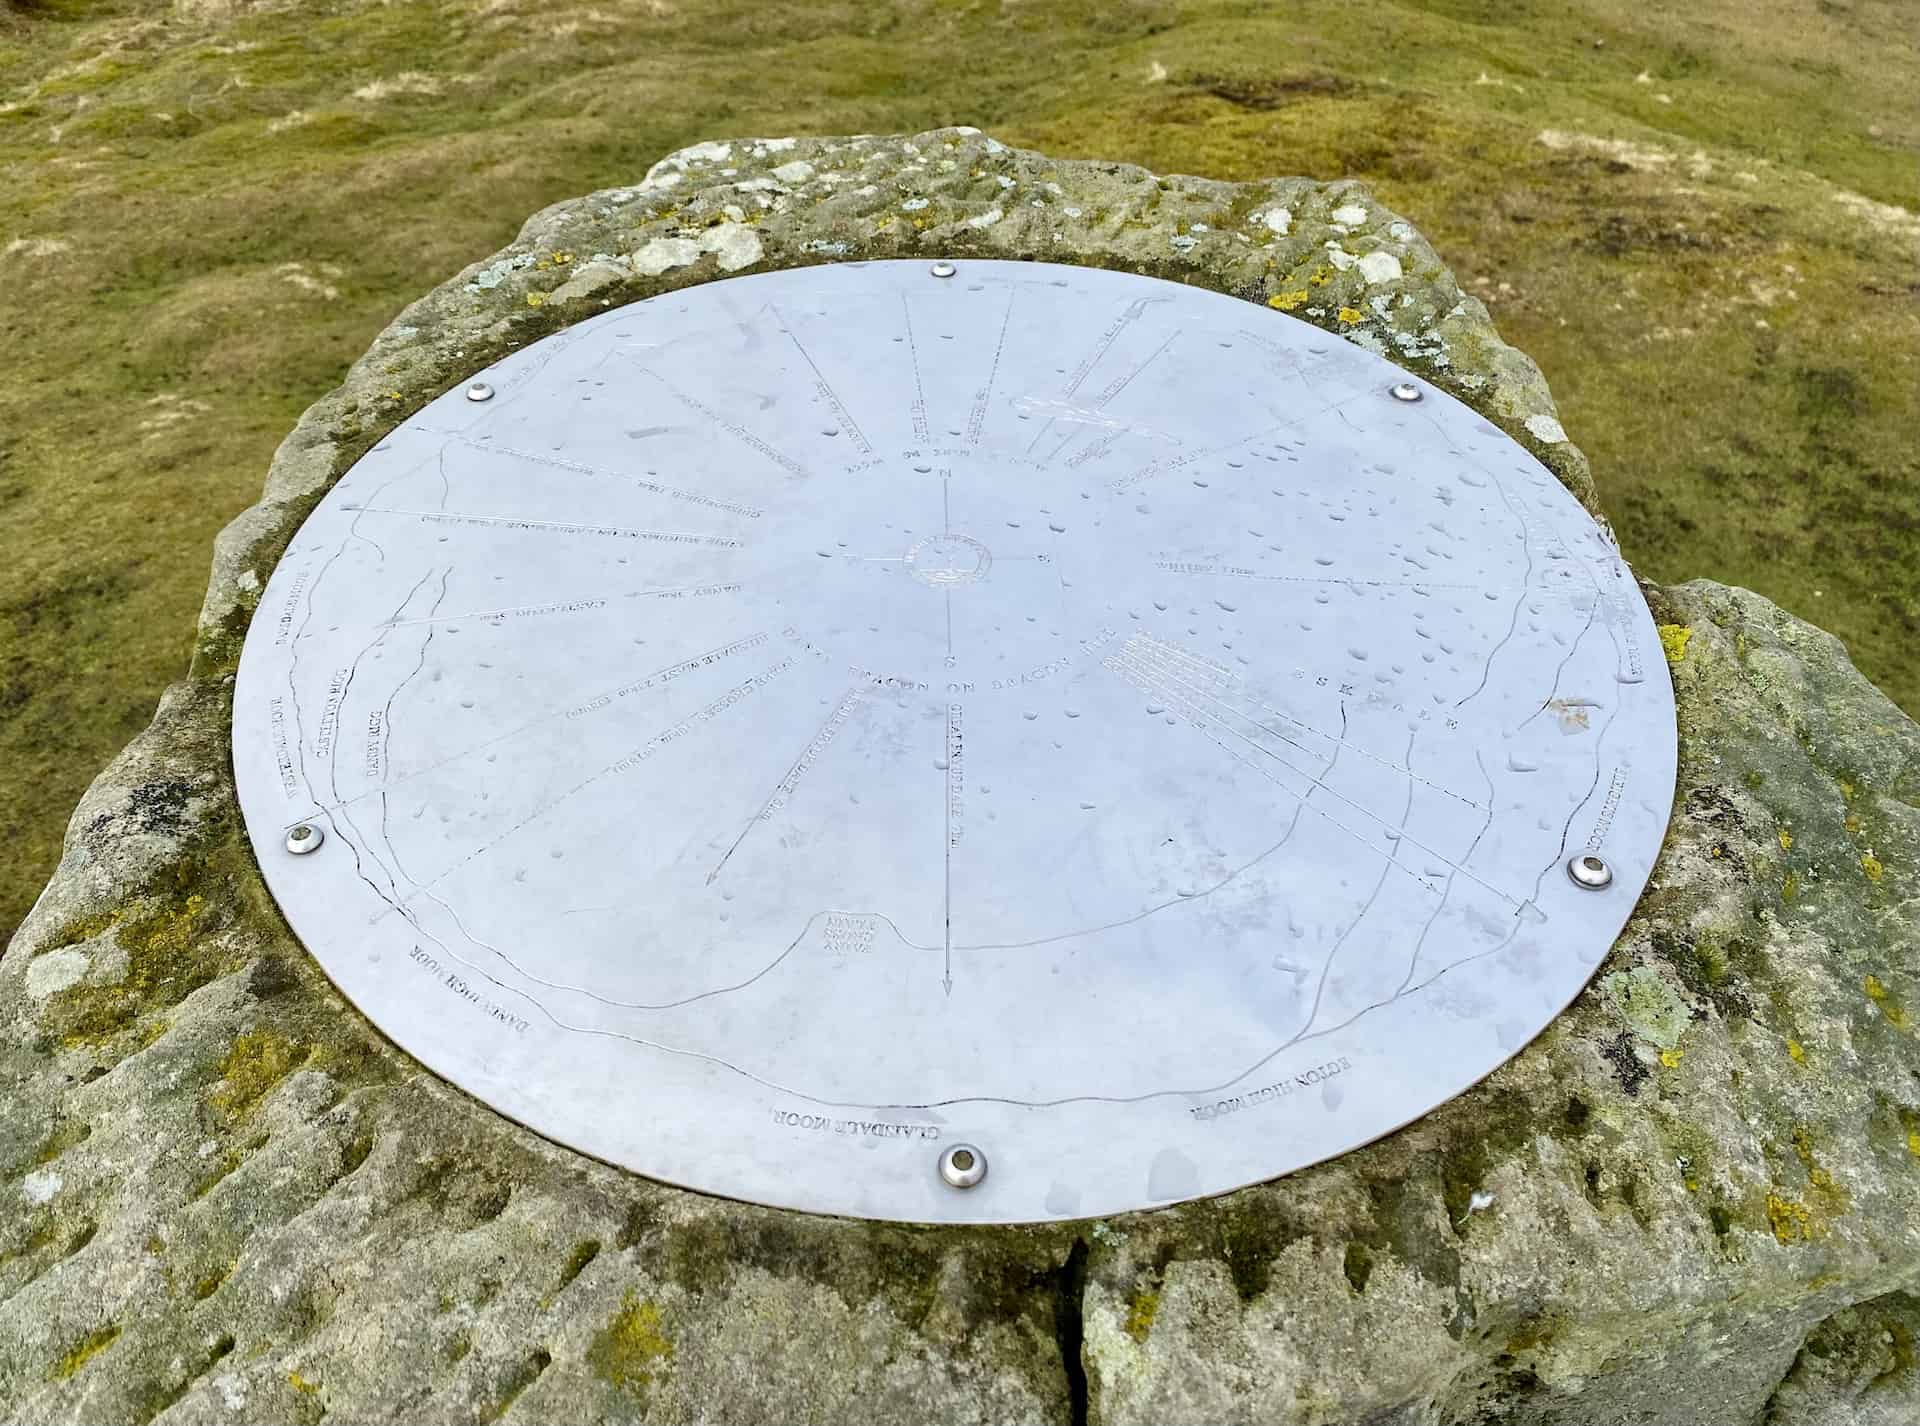 A toposcope stands on the hill on a concrete block near Danby Beacon. Toposcopes are typically found at elevated vantage points, such as hills or summits.